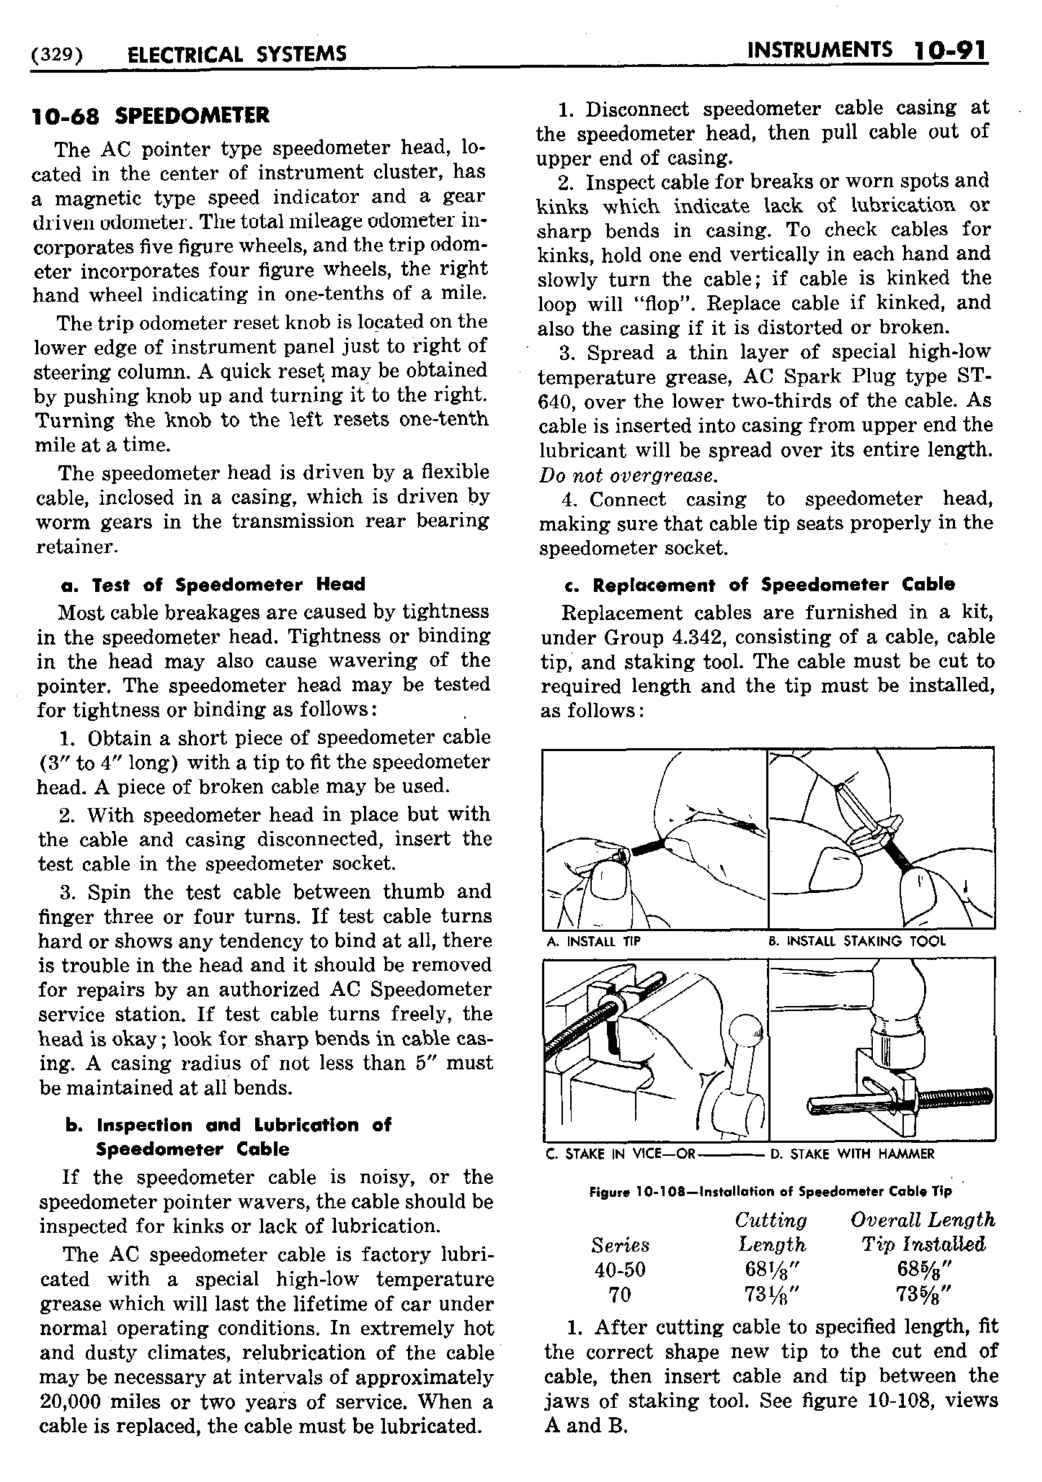 n_11 1950 Buick Shop Manual - Electrical Systems-091-091.jpg